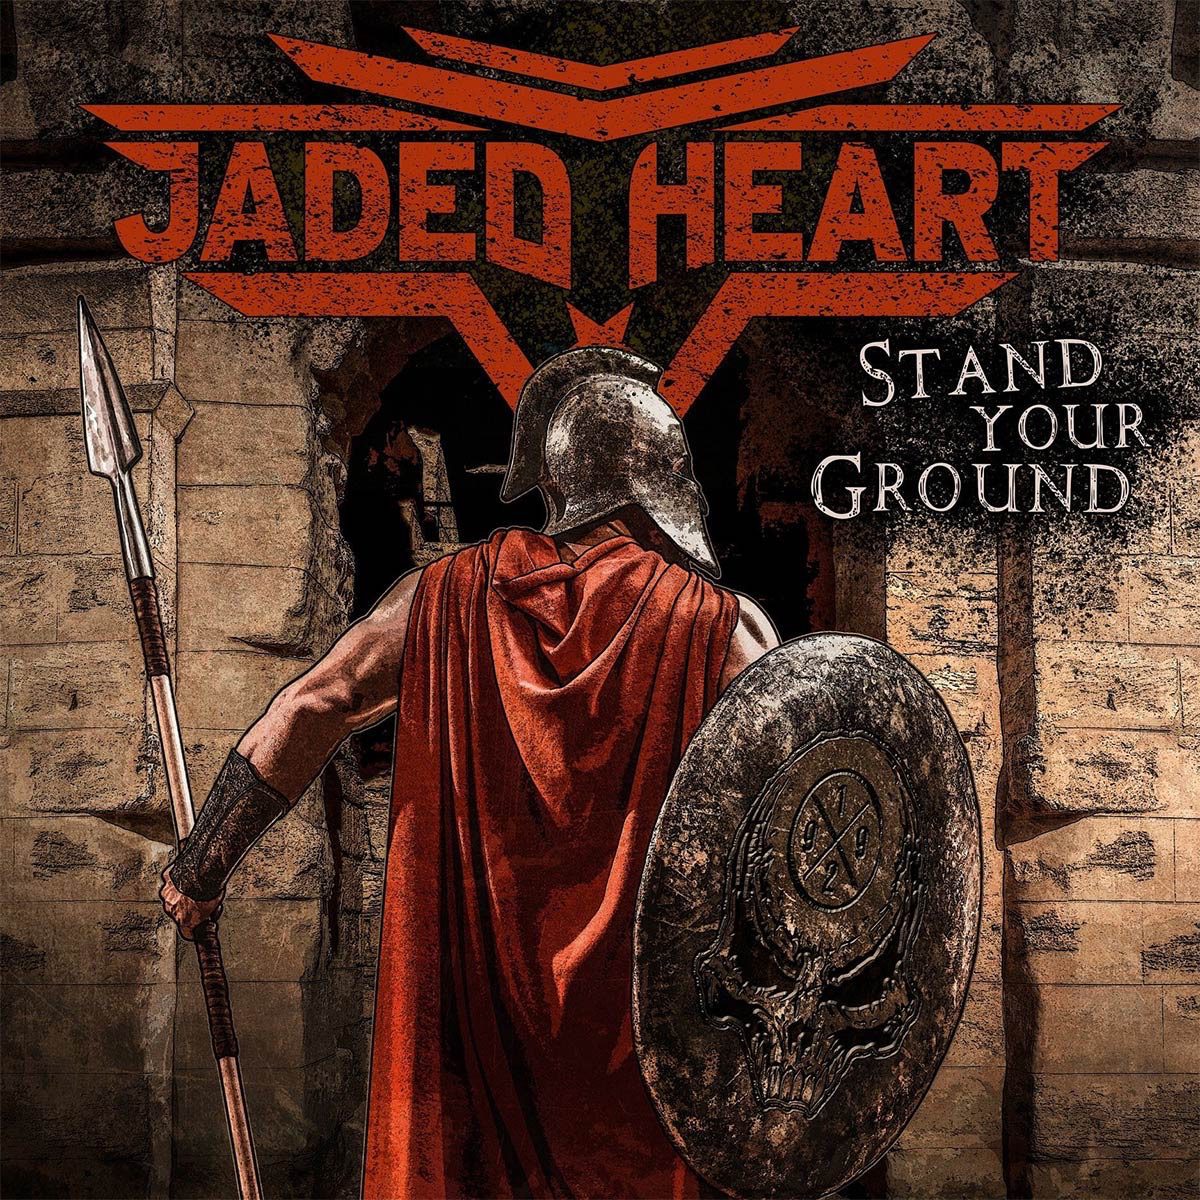 JADED HEART – Stand your ground